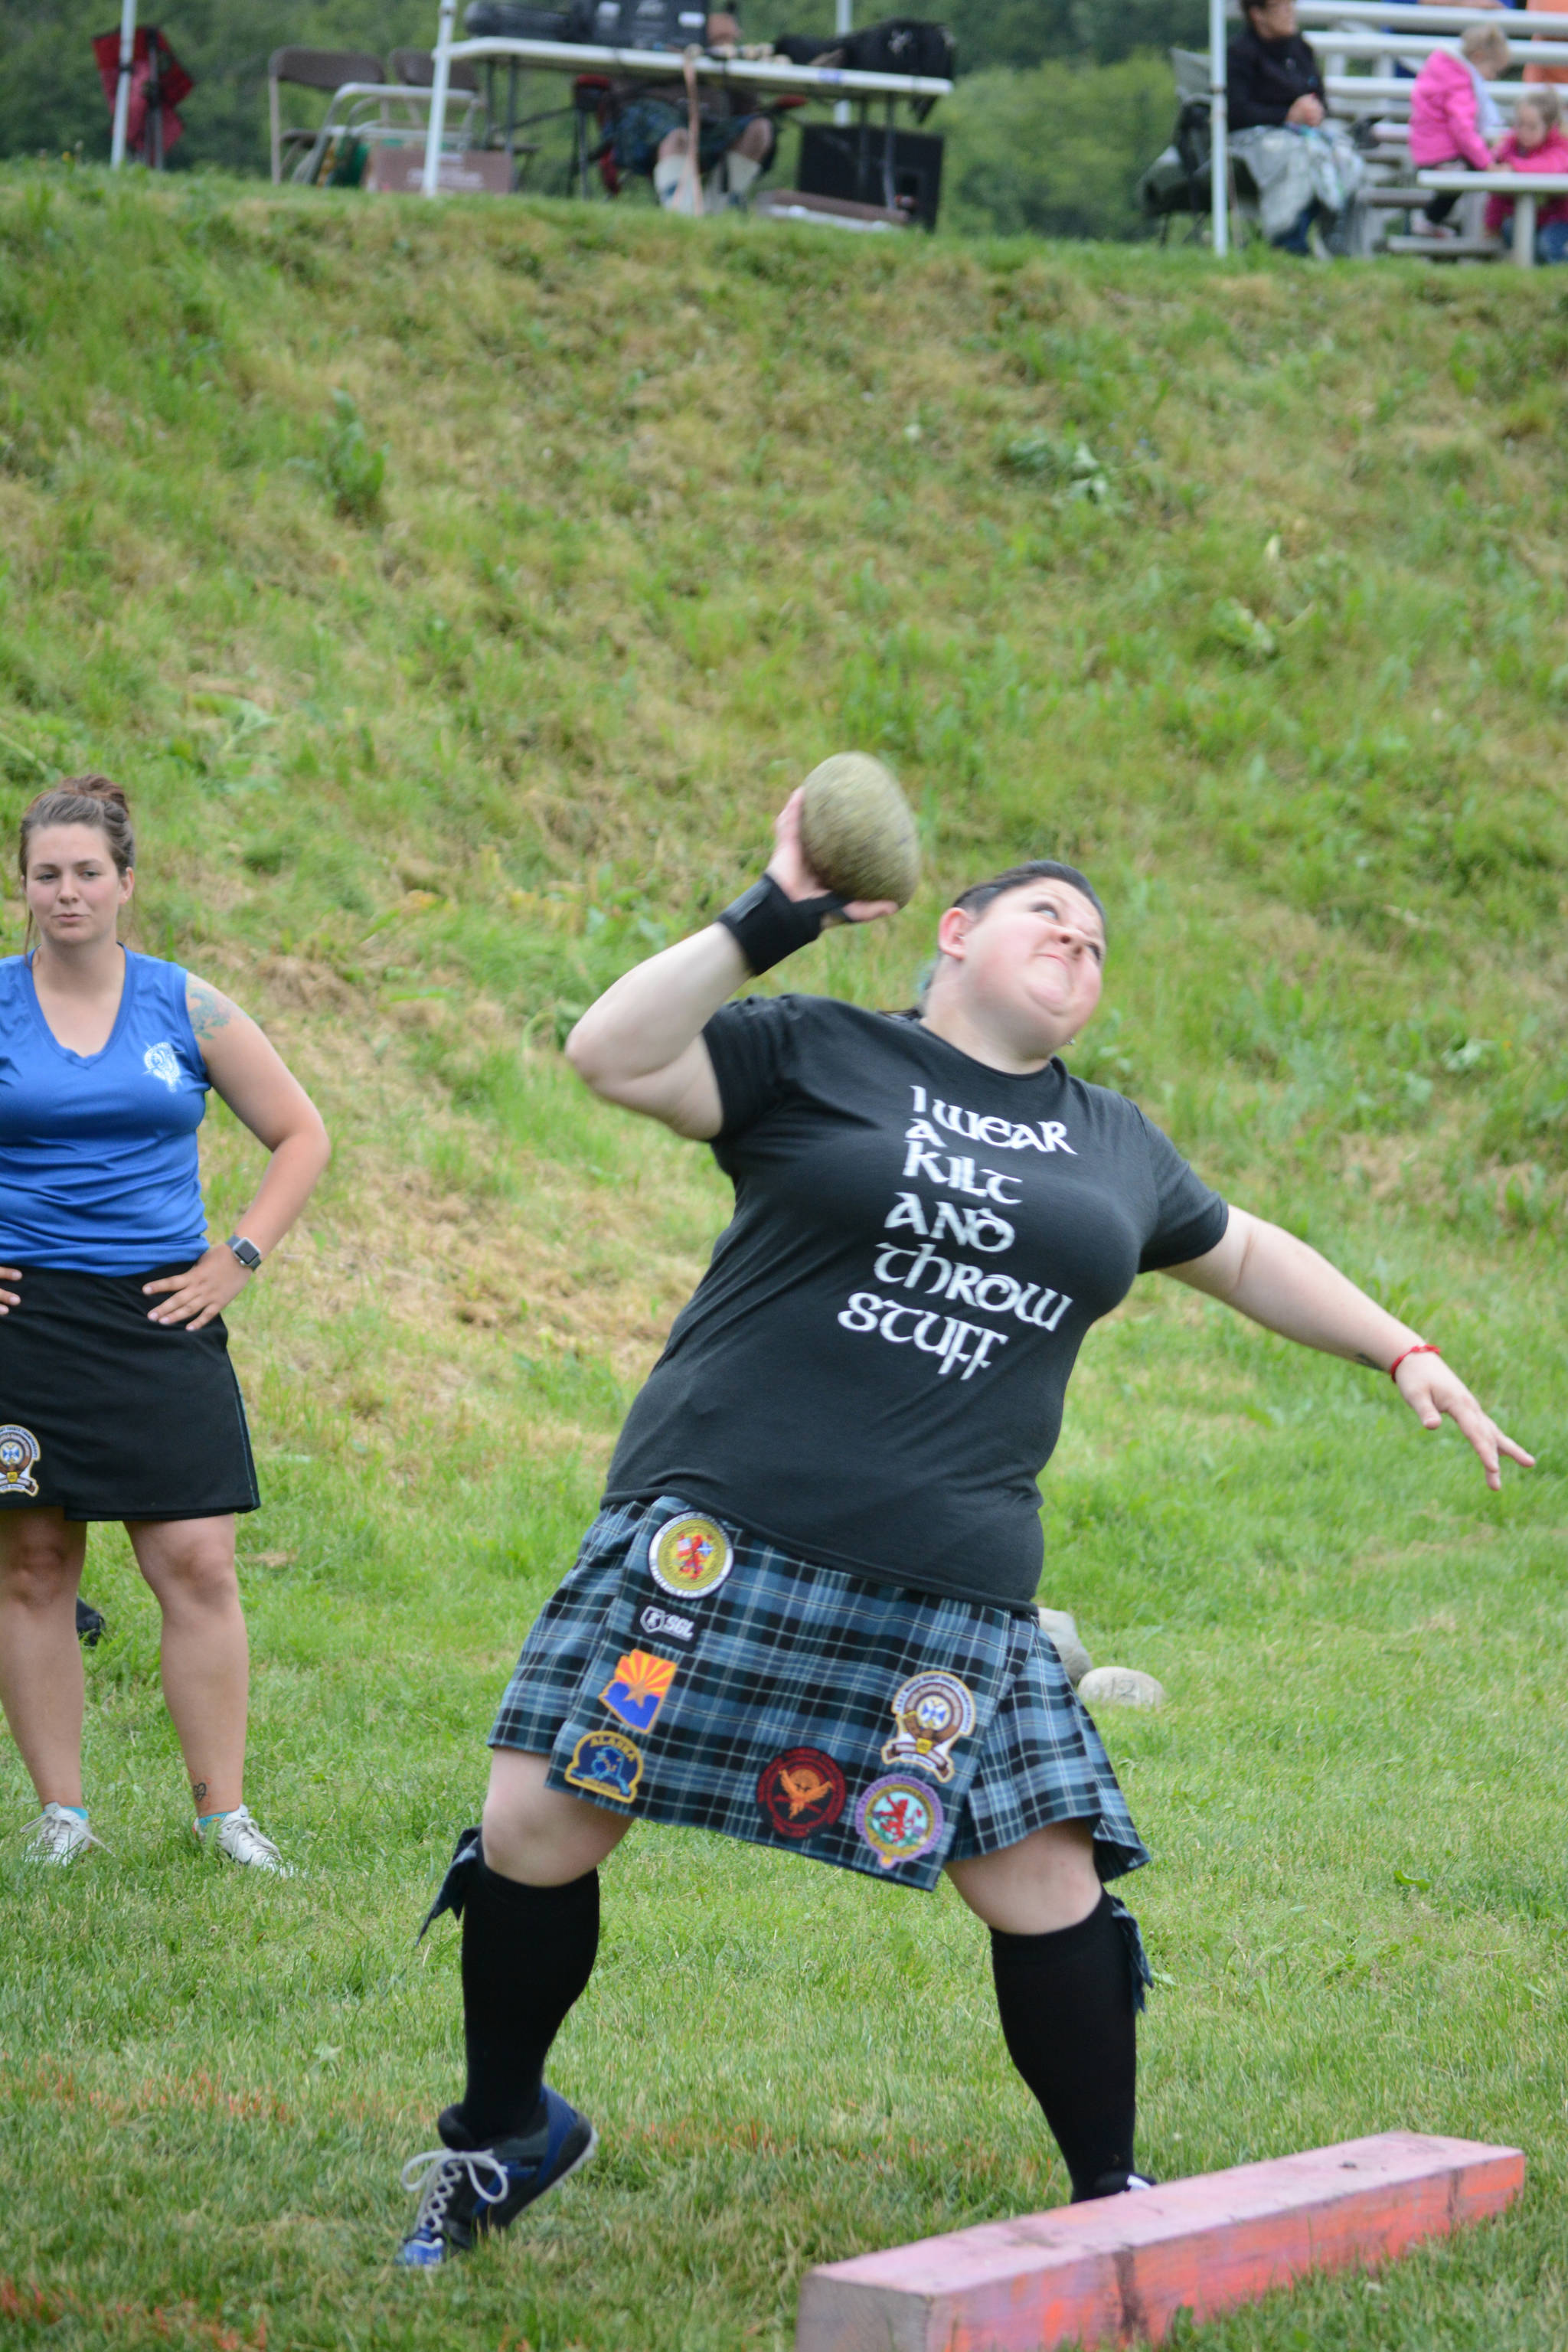 Jeni McDaniel throws the Braemar stone in the July 3, 2017 Kachemak Bay Scottish Club Games last Saturday at Karen Hornaday Park. (Photo by Michael Armstrong/Homer News)